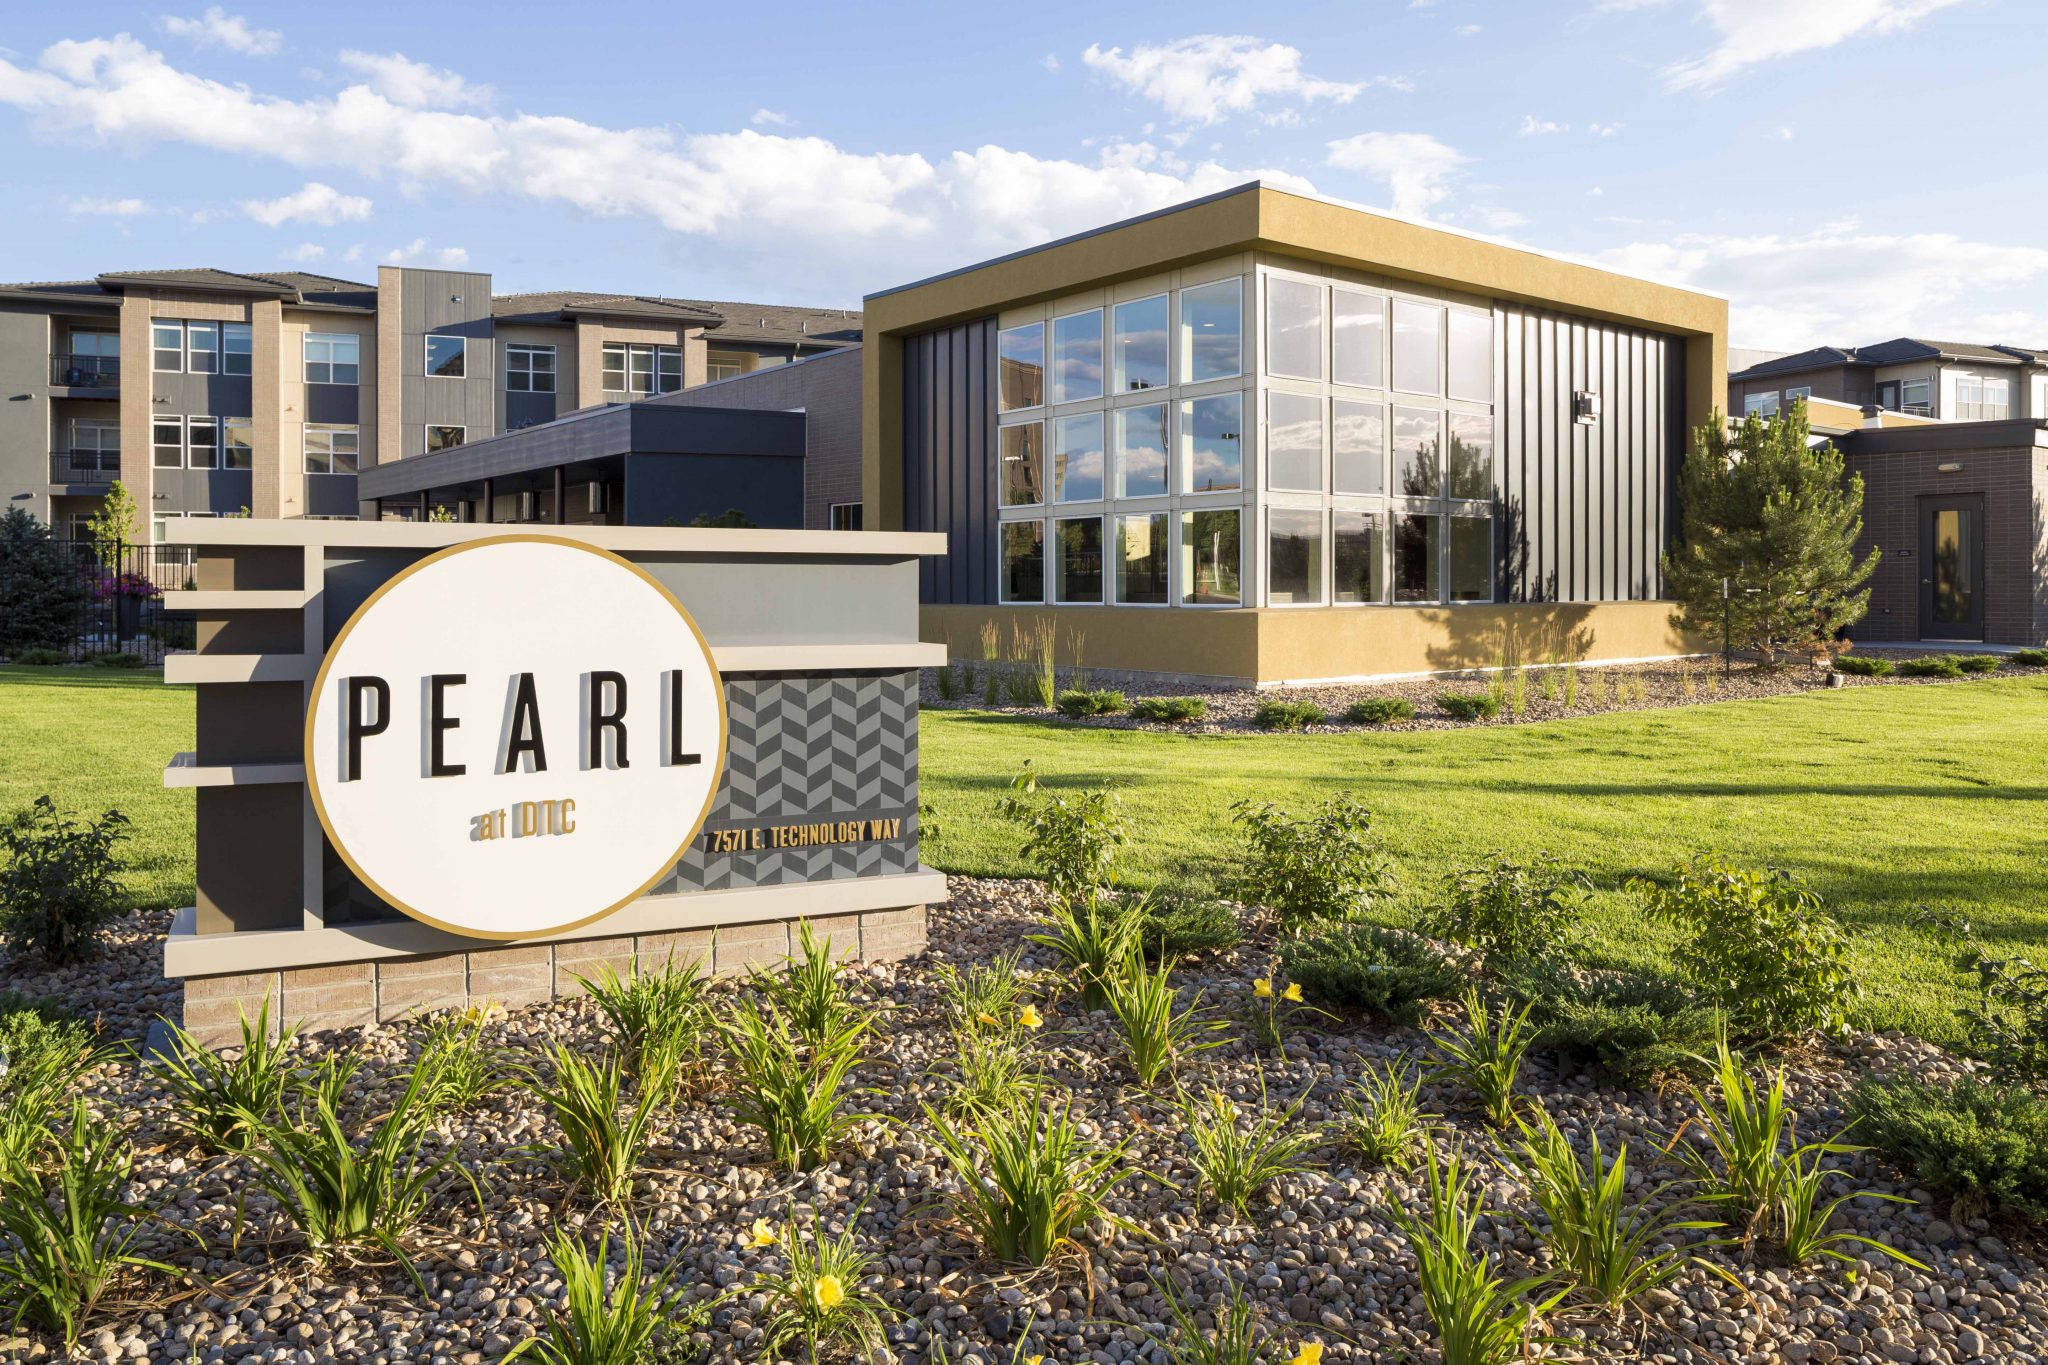 Exterior with sign for Pearl apartments with buildings in the background